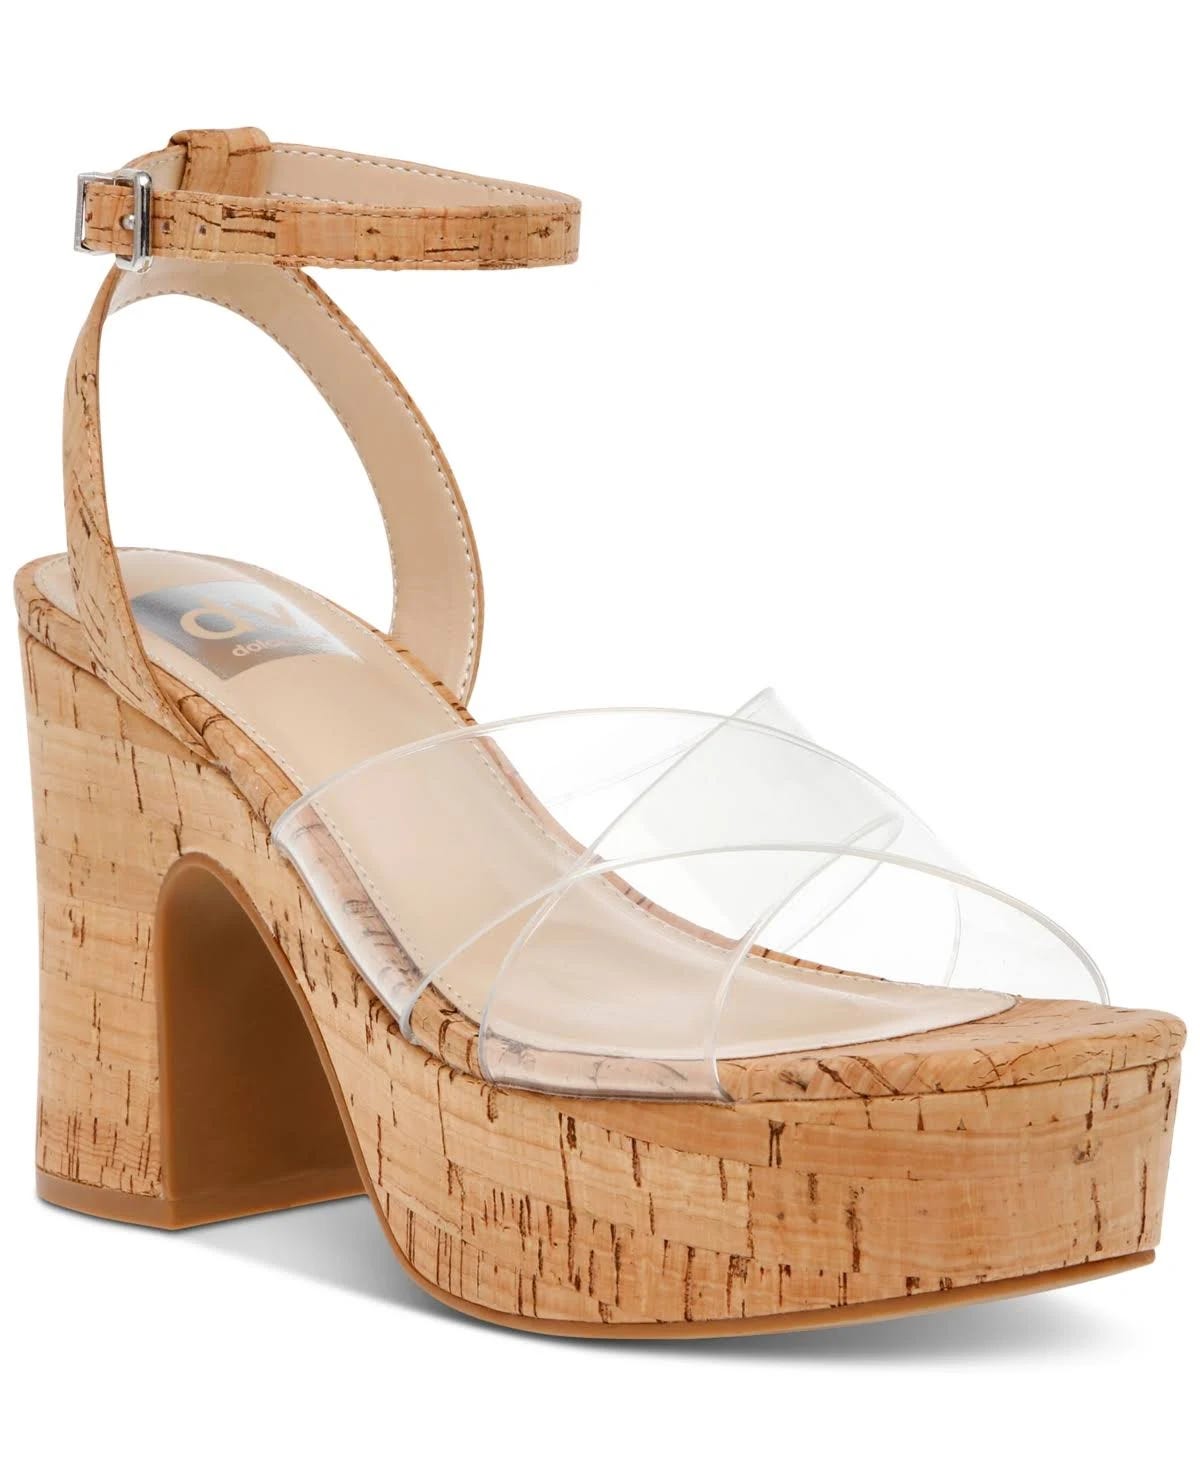 Stylish Clear Block Heel Sandals by Dolce Vita | Image